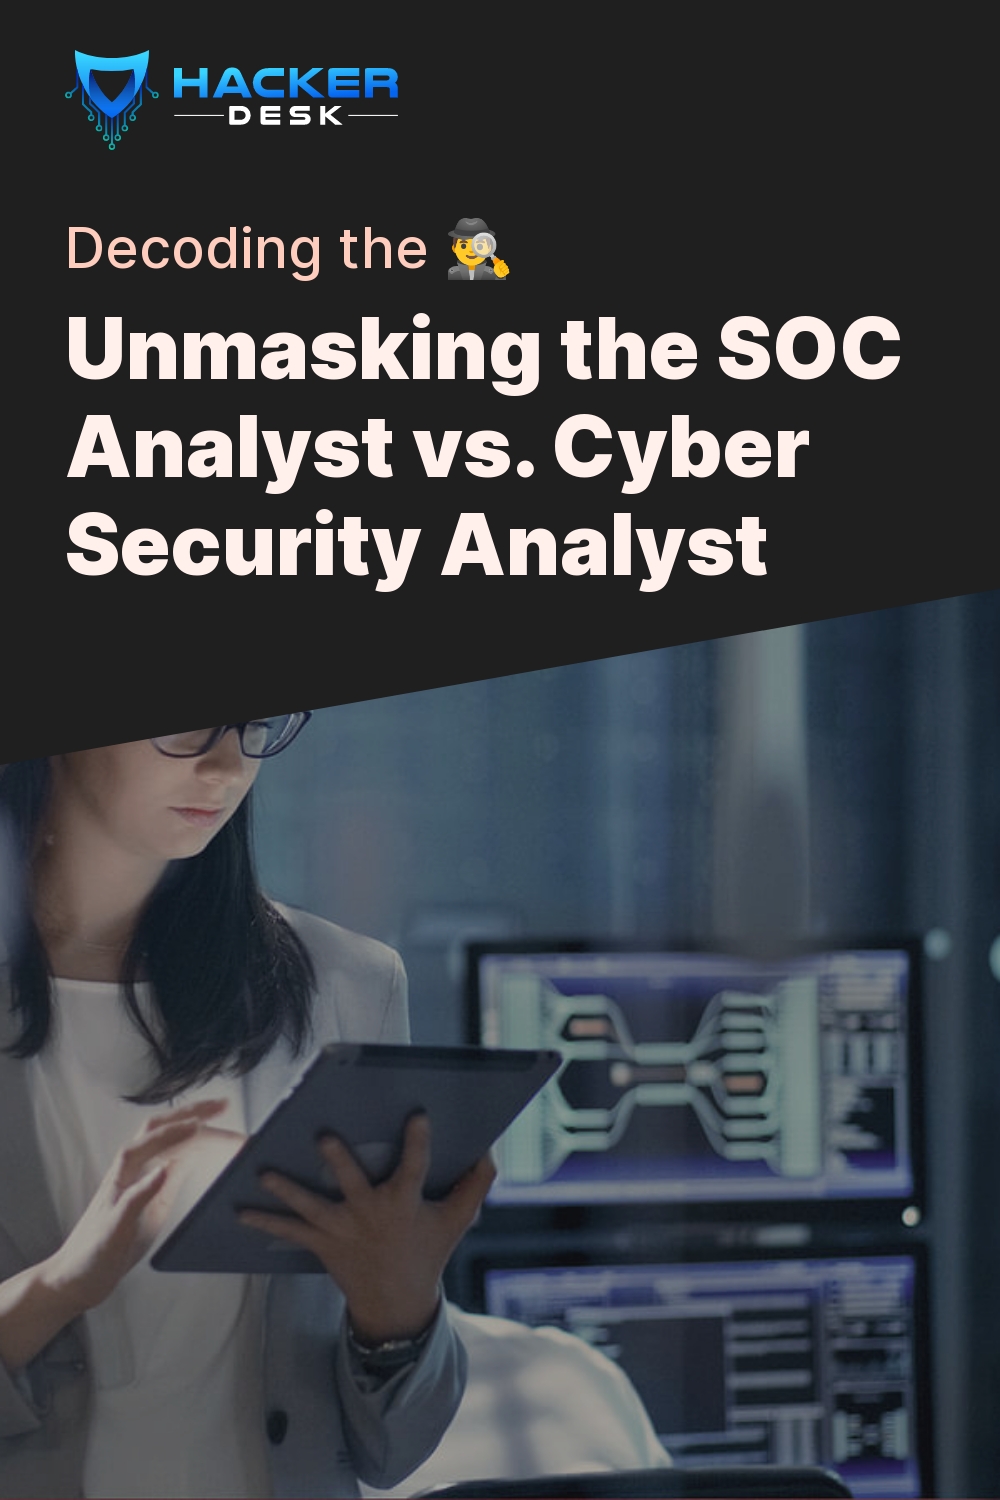 Unmasking the SOC Analyst vs. Cyber Security Analyst - Decoding the 🕵️‍♂️